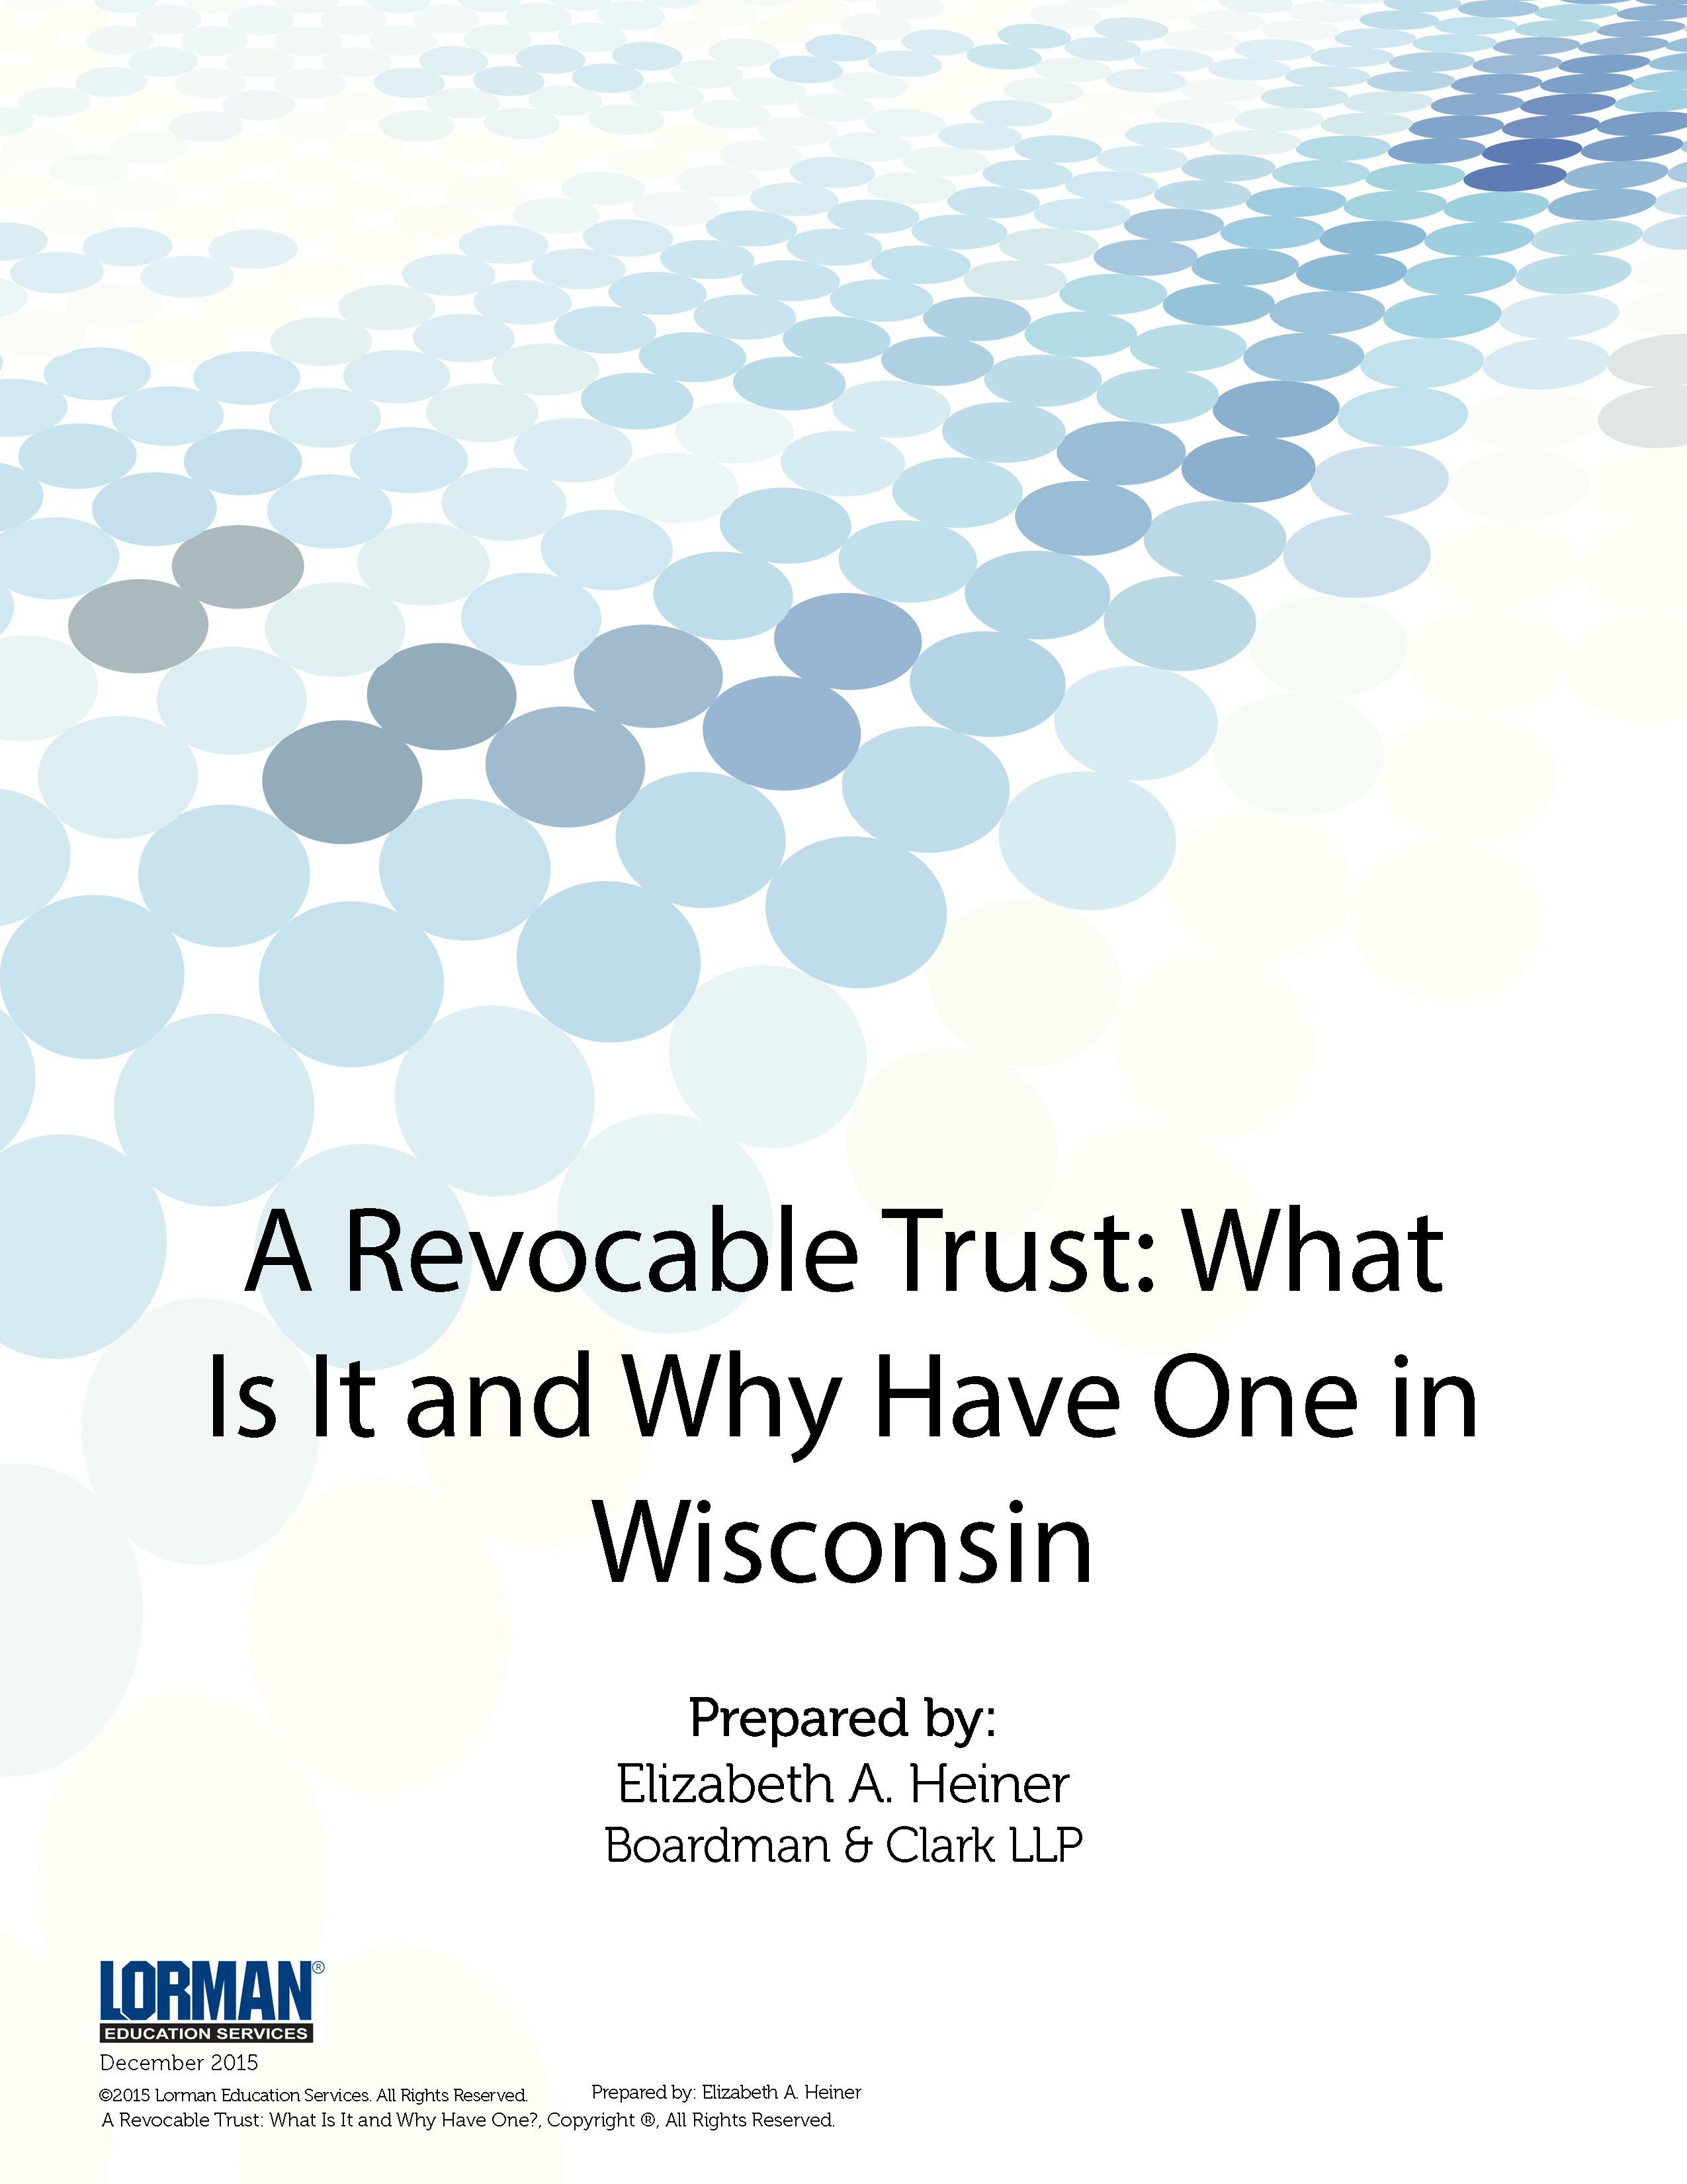 A Revocable Trust: What Is It and Why Have One in Wisconsin